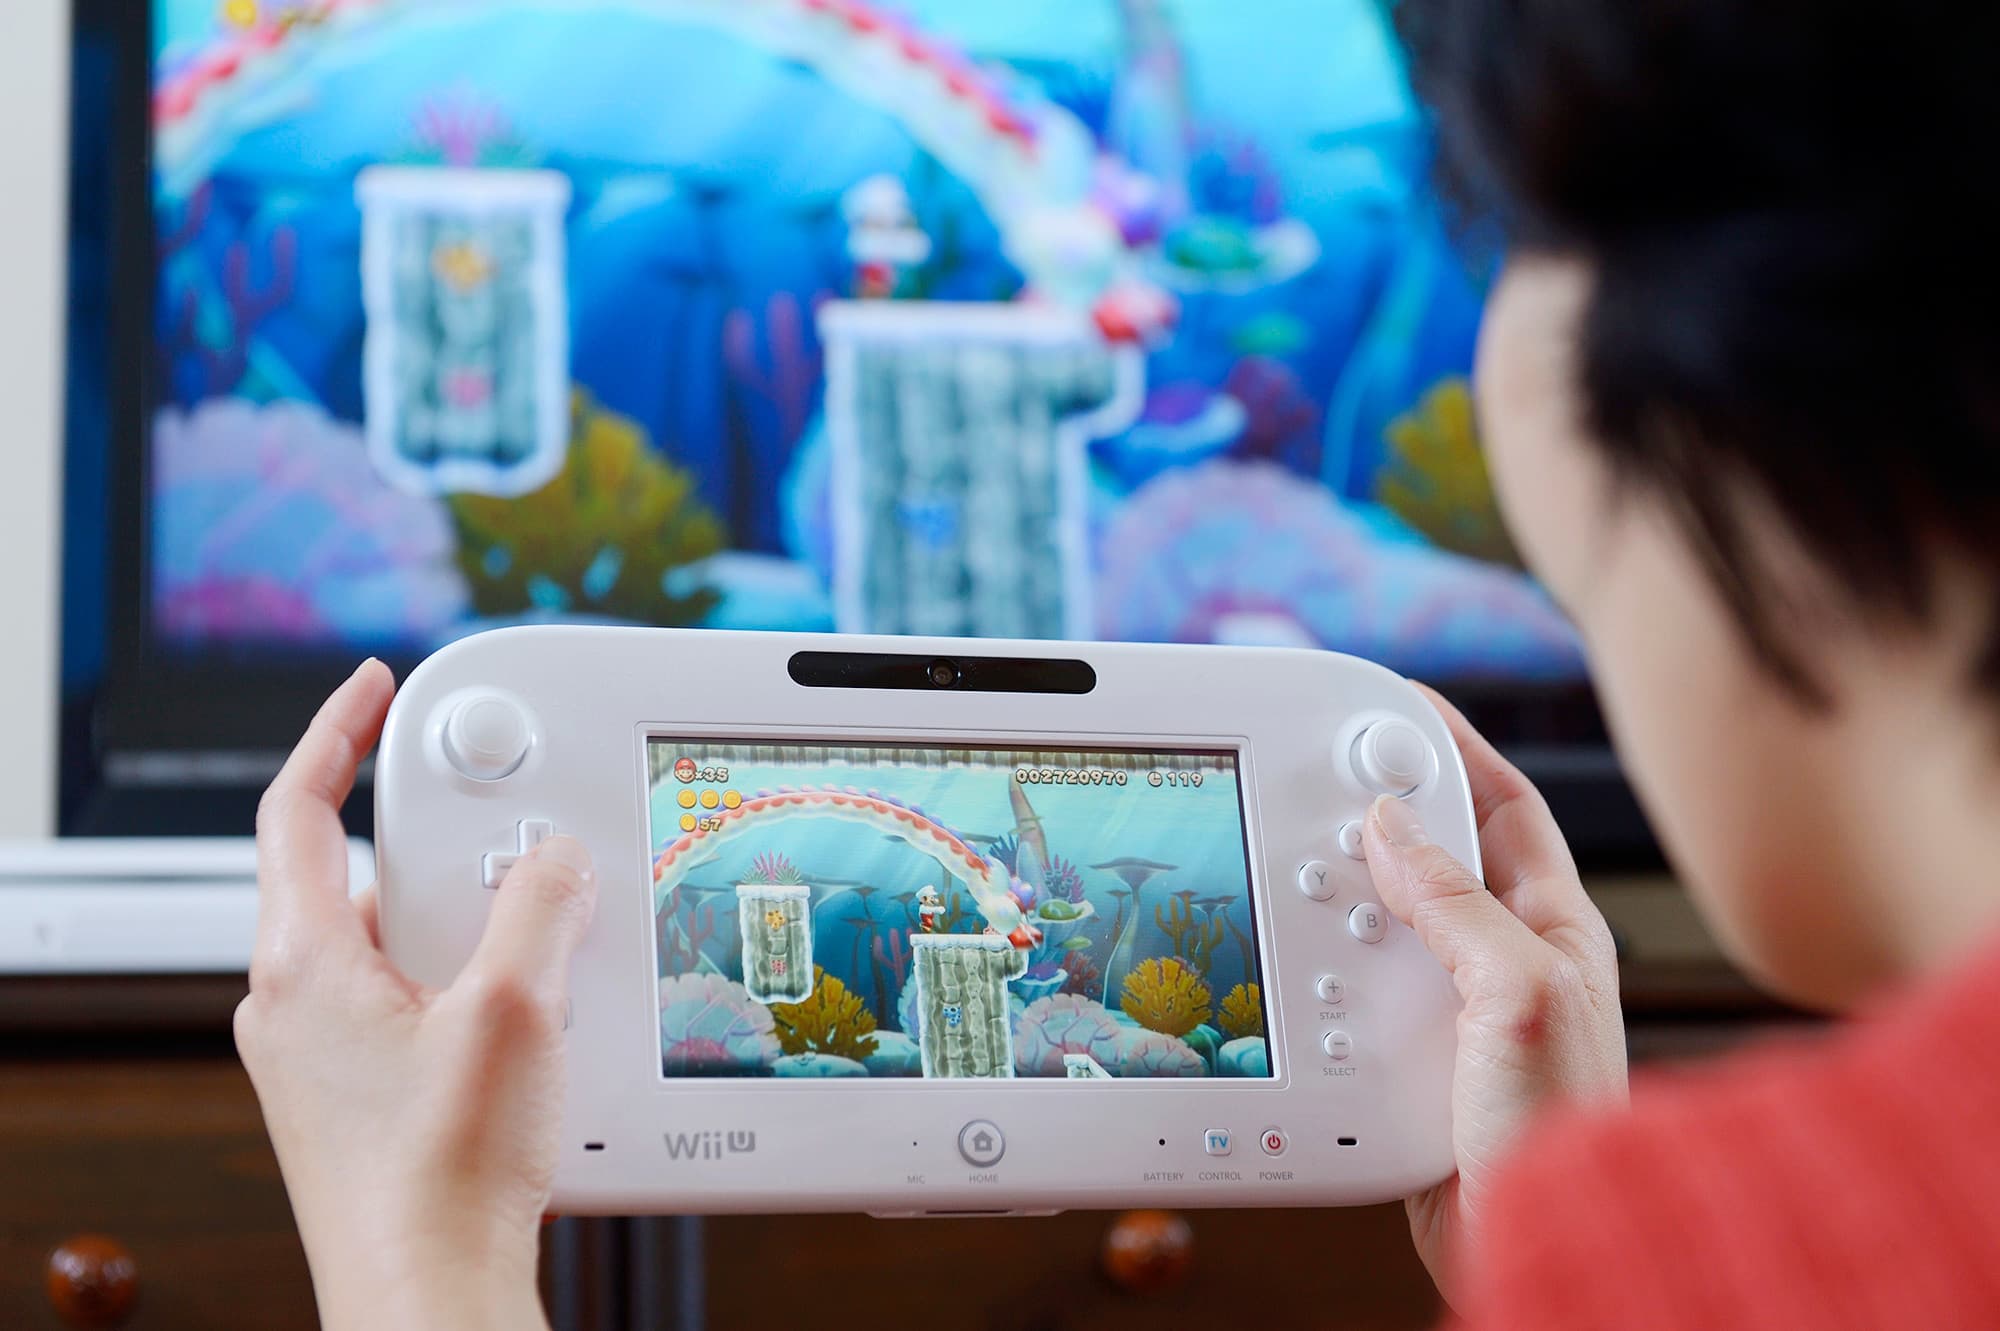 Nintendo Ceo We Are To Blame For Poor Wii U Sales